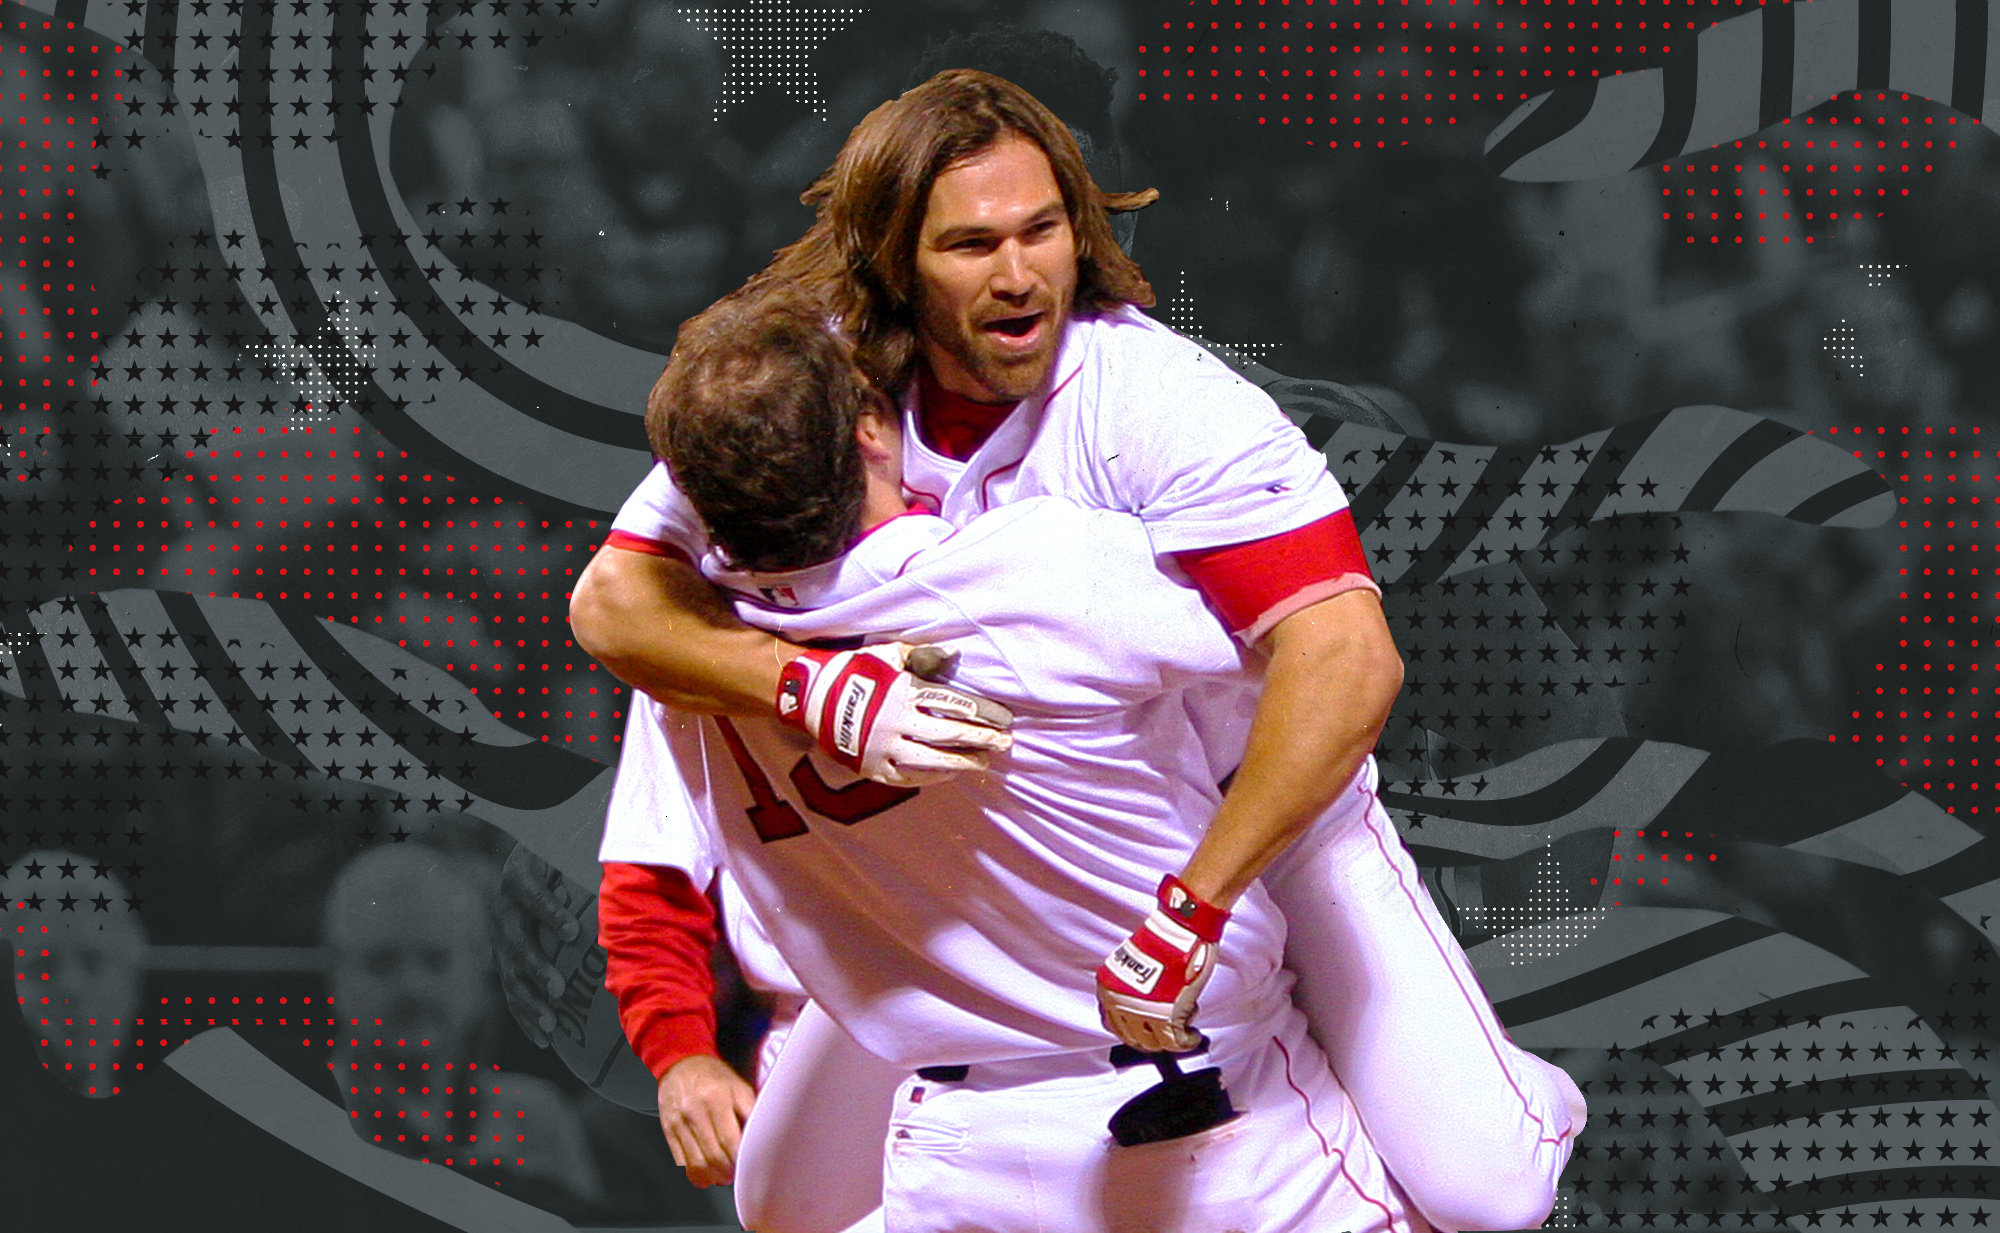 Johnny Damon jumps in a teammate’s arms after sealing a 5-4 Red Sox victory over the New York Yankees in game 5 of the American League Championship series.